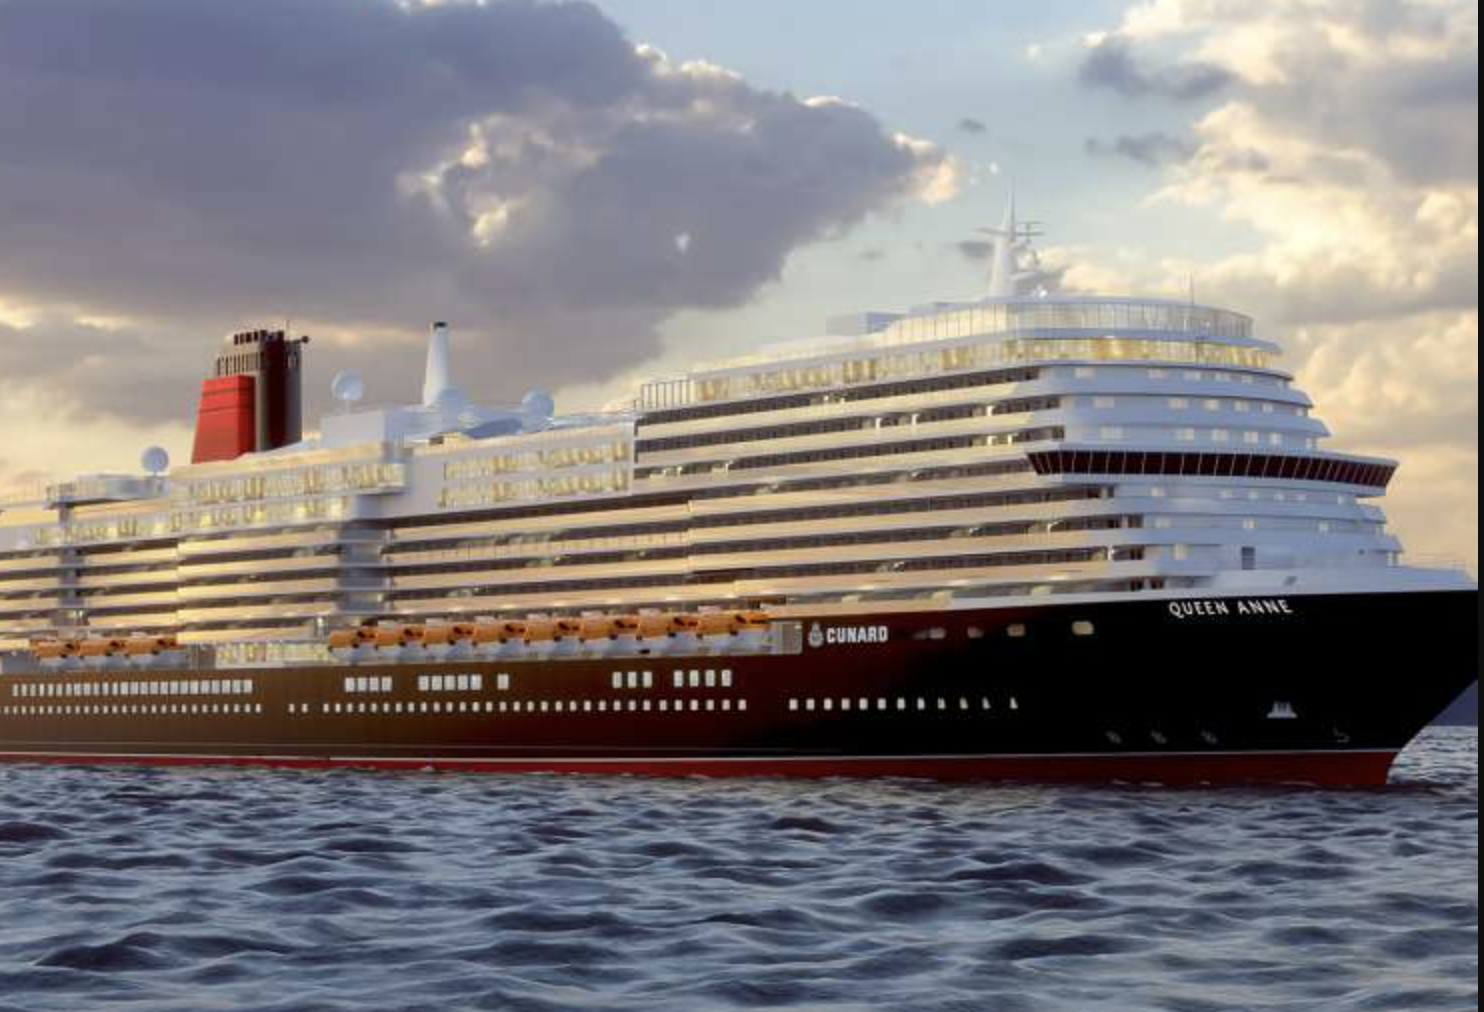 <p><b>Price range:</b> $1,500-$10,000 per person for a 7-night cruise</p><p><b>Top choice for</b>: Travelers who value elegance, luxury, and sophistication</p><p><b>Why it's good for seniors</b>: Cunard Line offers a classic and refined cruise experience with a focus on luxury and tradition. They have a wide range of enrichment programs and activities, including ballroom dancing lessons and guest lectures, which are ideal for seniors who enjoy elegant and intellectual pursuits.</p><p><a href="https://www.cunard.com/en-us">Cunard Line</a> is one of the most iconic names in the cruising world. Since its launch in 1839, the cruise line has been synonymous with elegance, luxury, and sophistication, offering passengers a truly unique and unforgettable experience.</p><p>One of the standout features of Cunard Line is its commitment to the traditions of ocean travel. The cruise line's iconic ocean liners, including the Queen Mary 2, are designed to evoke the glamour and sophistication of a bygone era, with elegant decor, fine dining, and exceptional service.</p><p>Cunard Line is also known for its immersive itineraries. The cruise line offers voyages to destinations all over the world, from the glittering capitals of Europe to the exotic ports of Asia and Africa. Whether you're looking to explore historic landmarks, soak up the sun on a tropical beach, or experience the local culture and cuisine, there's a Cunard Line itinerary that's perfect for you.</p><p>Another highlight of Cunard Line is its commitment to exceptional service. From the attentive staff to the luxurious accommodations and amenities, Cunard Line is dedicated to providing passengers with an experience that's truly unforgettable. Whether you're looking for a romantic getaway or a family vacation, Cunard Line goes above and beyond to ensure that every detail of your voyage is taken care of.</p><p>The cruise line has been named Best Luxury Cruise Line by Travel Weekly and Best Cruise Line for Romance by US News & World Report, among many other honors.</p><p><b>Editorial note</b>:<i> Prices may vary based on the time of year, itinerary, and cabin type selected.</i></p><p><i>This article was produced and syndicated by <a href="https://mediafeed.org/">MediaFeed.</a></i></p>